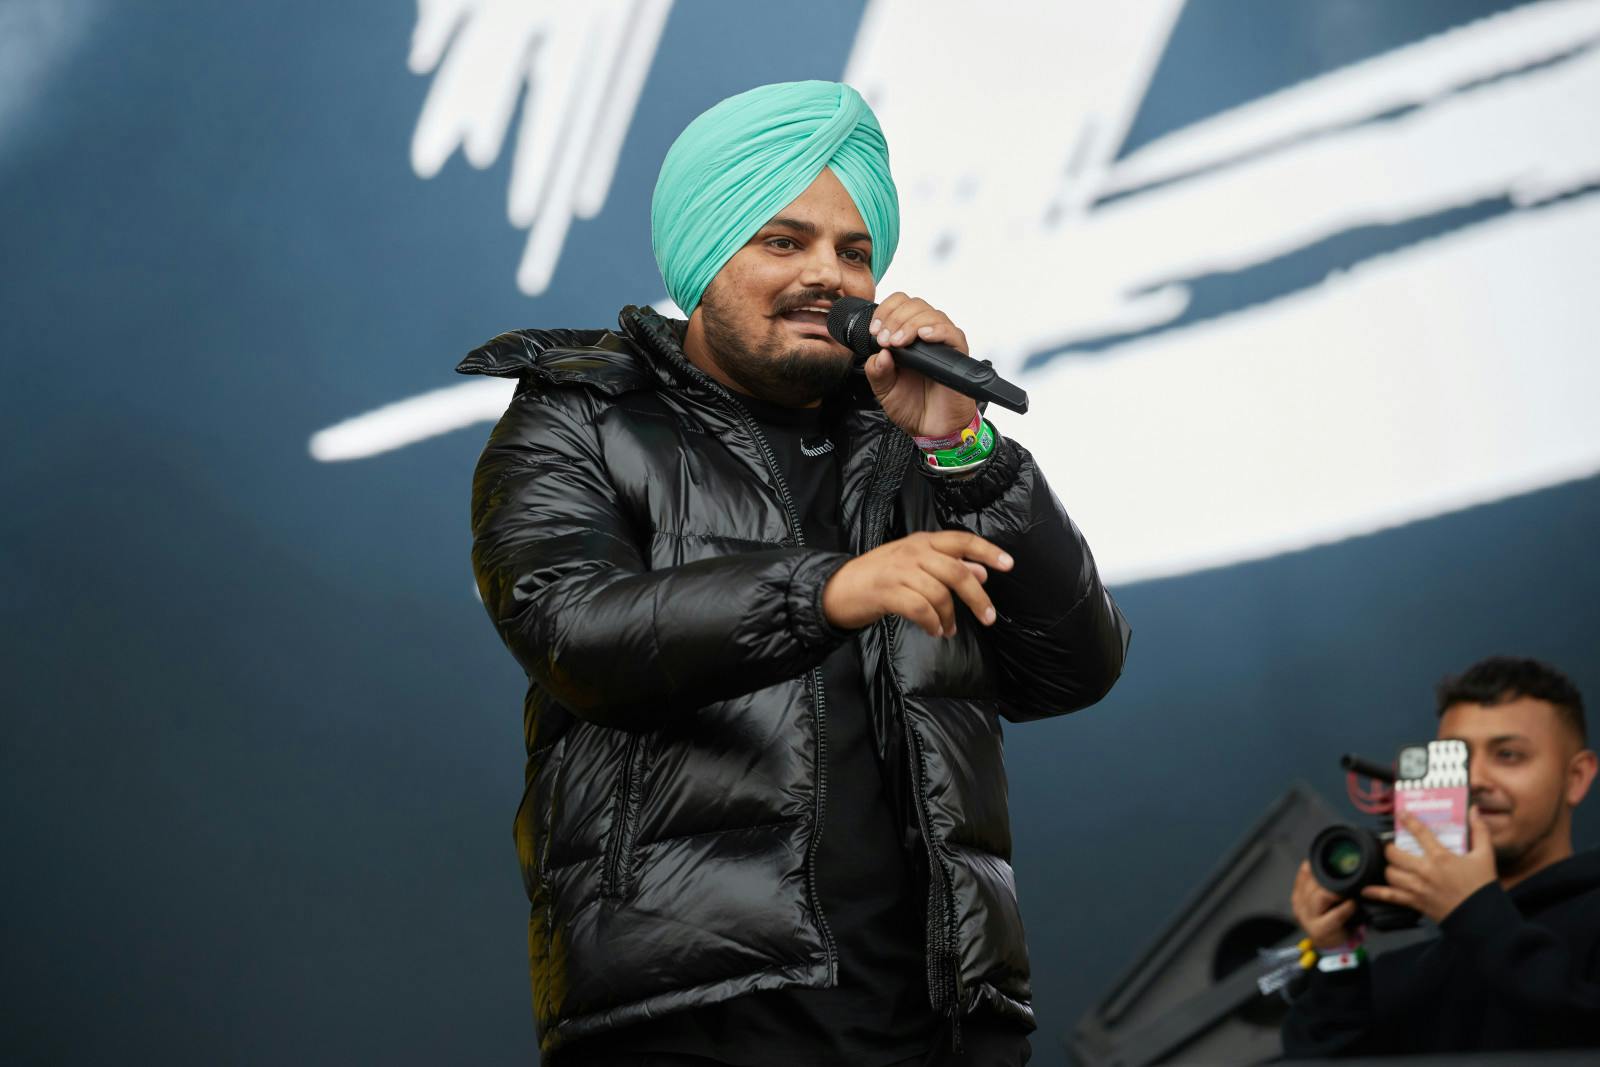 Sidhu Moose Wala performs during day 3 of Wireless Festival 2021 at Crystal Palace on September 12, 2021 in London, England. (Burak Cingi/Redferns/Getty)
